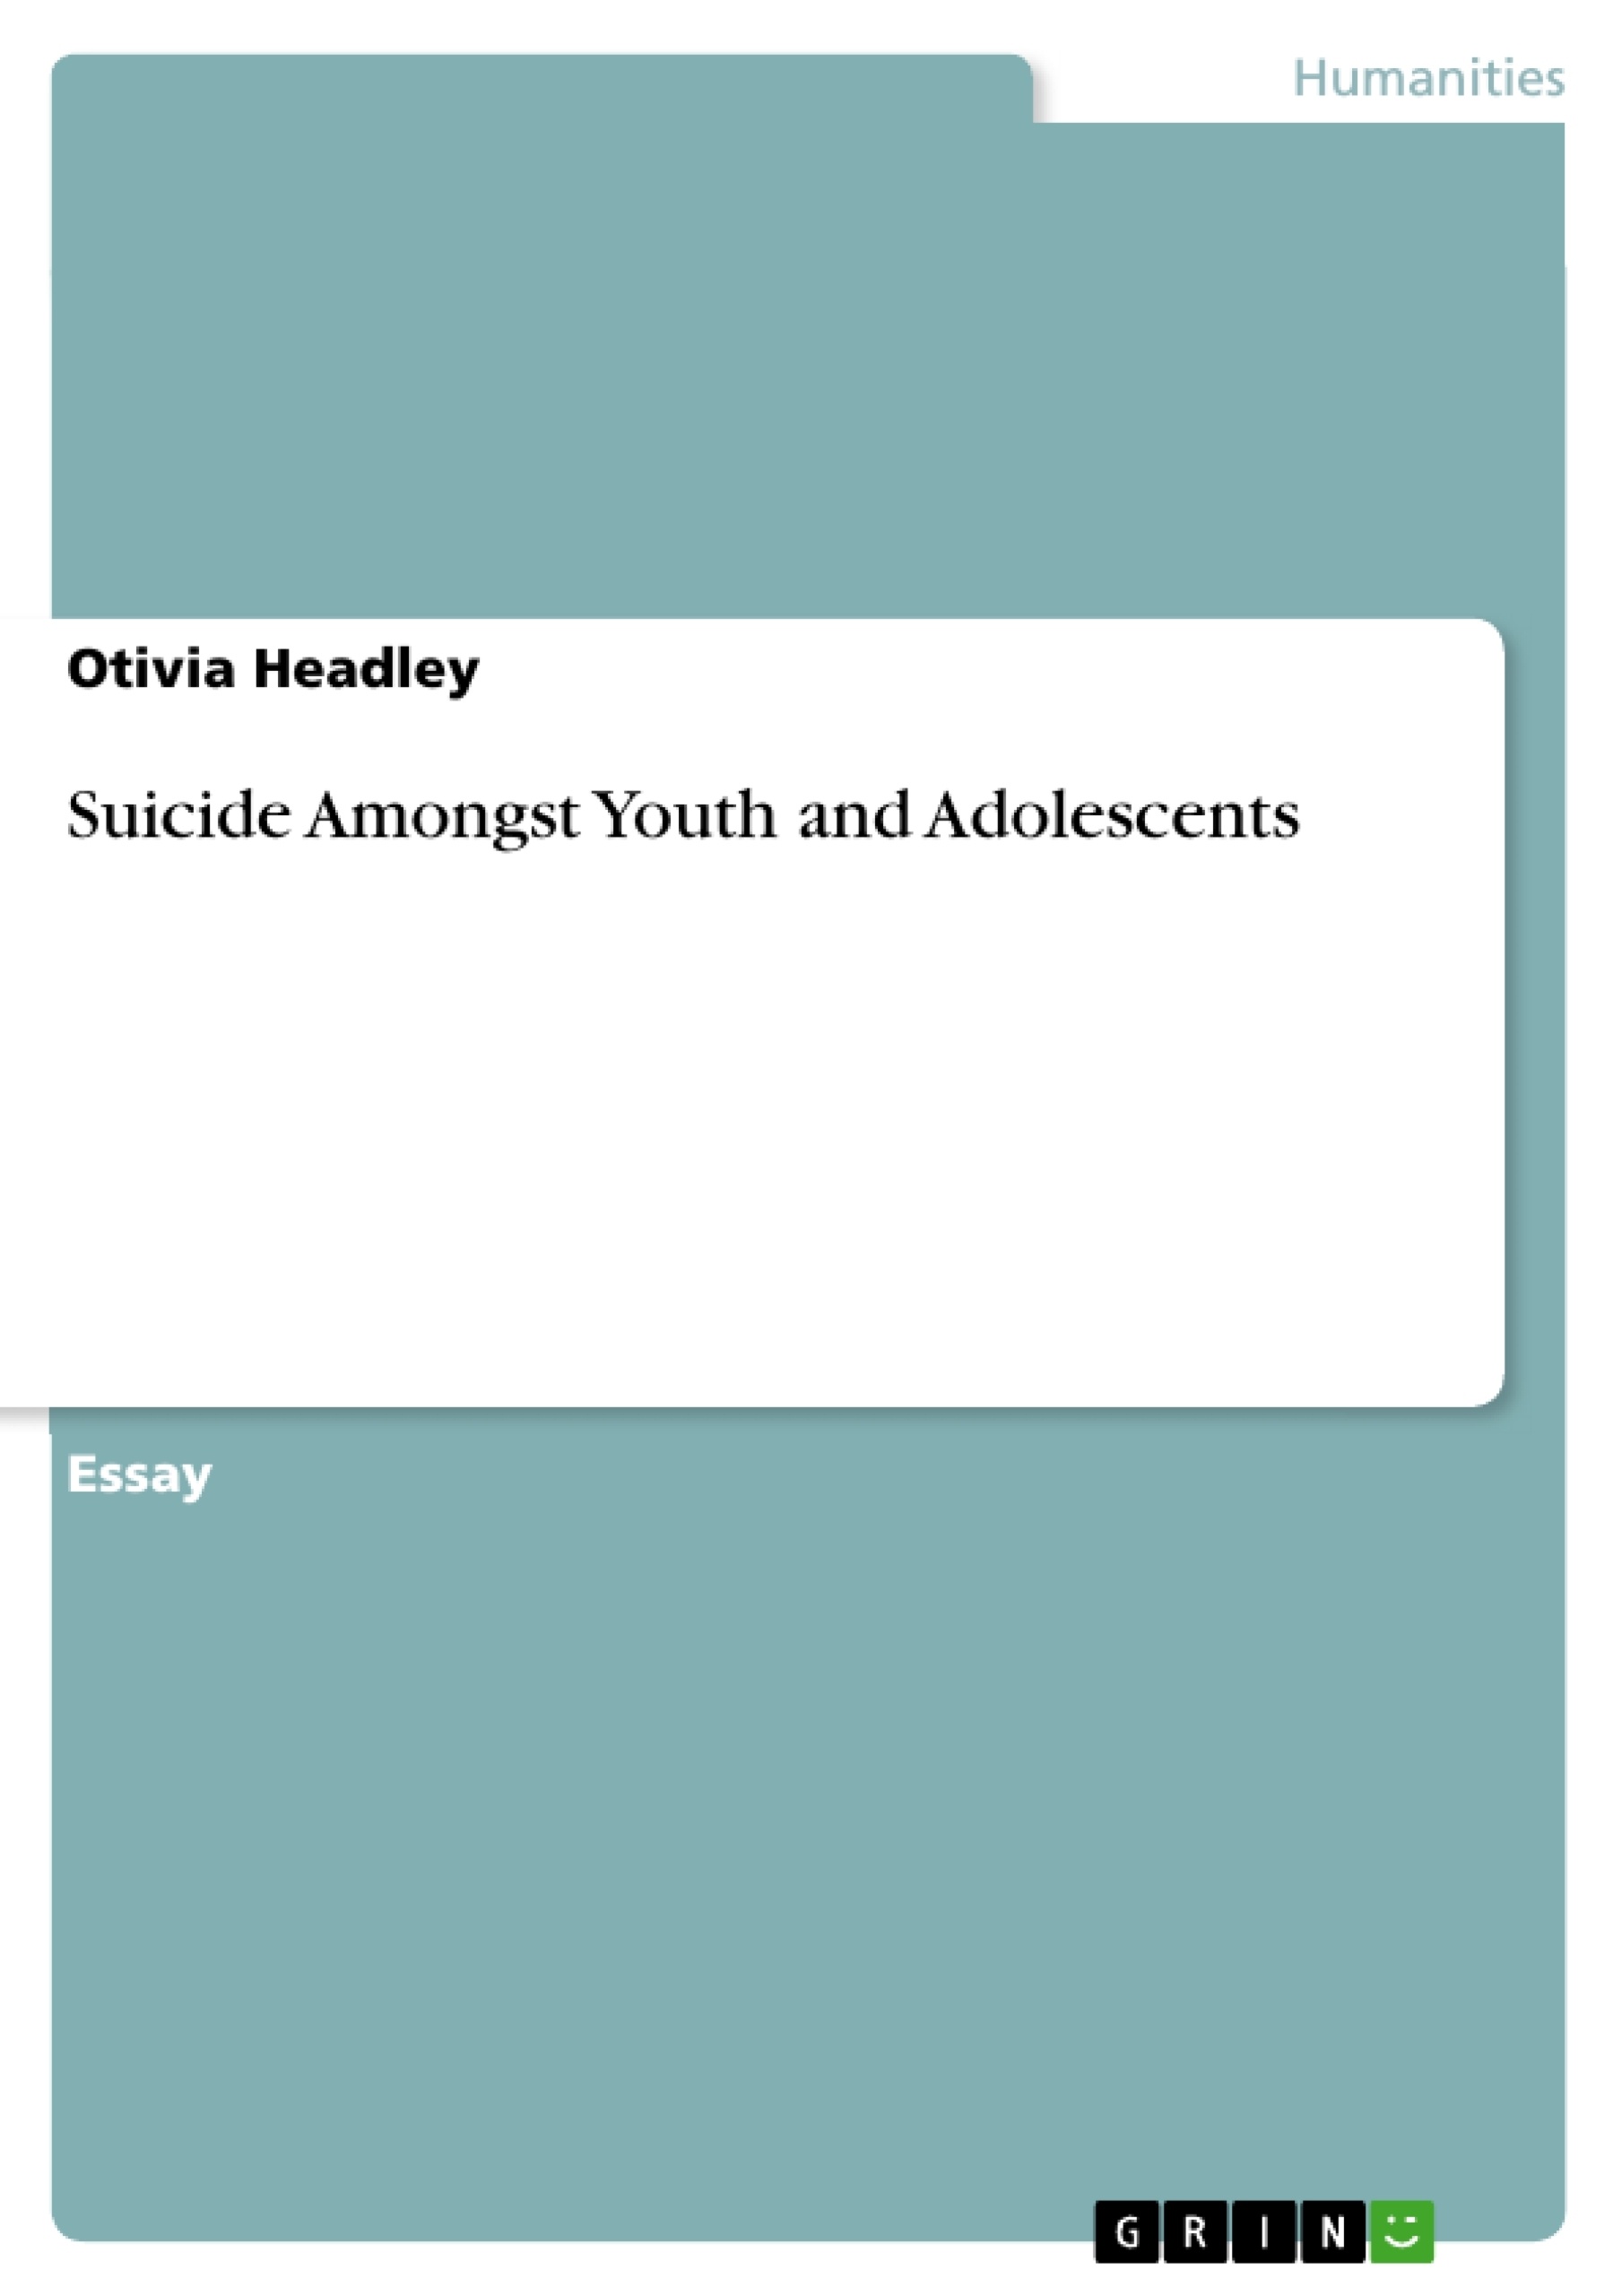 Title: Suicide Amongst Youth and Adolescents